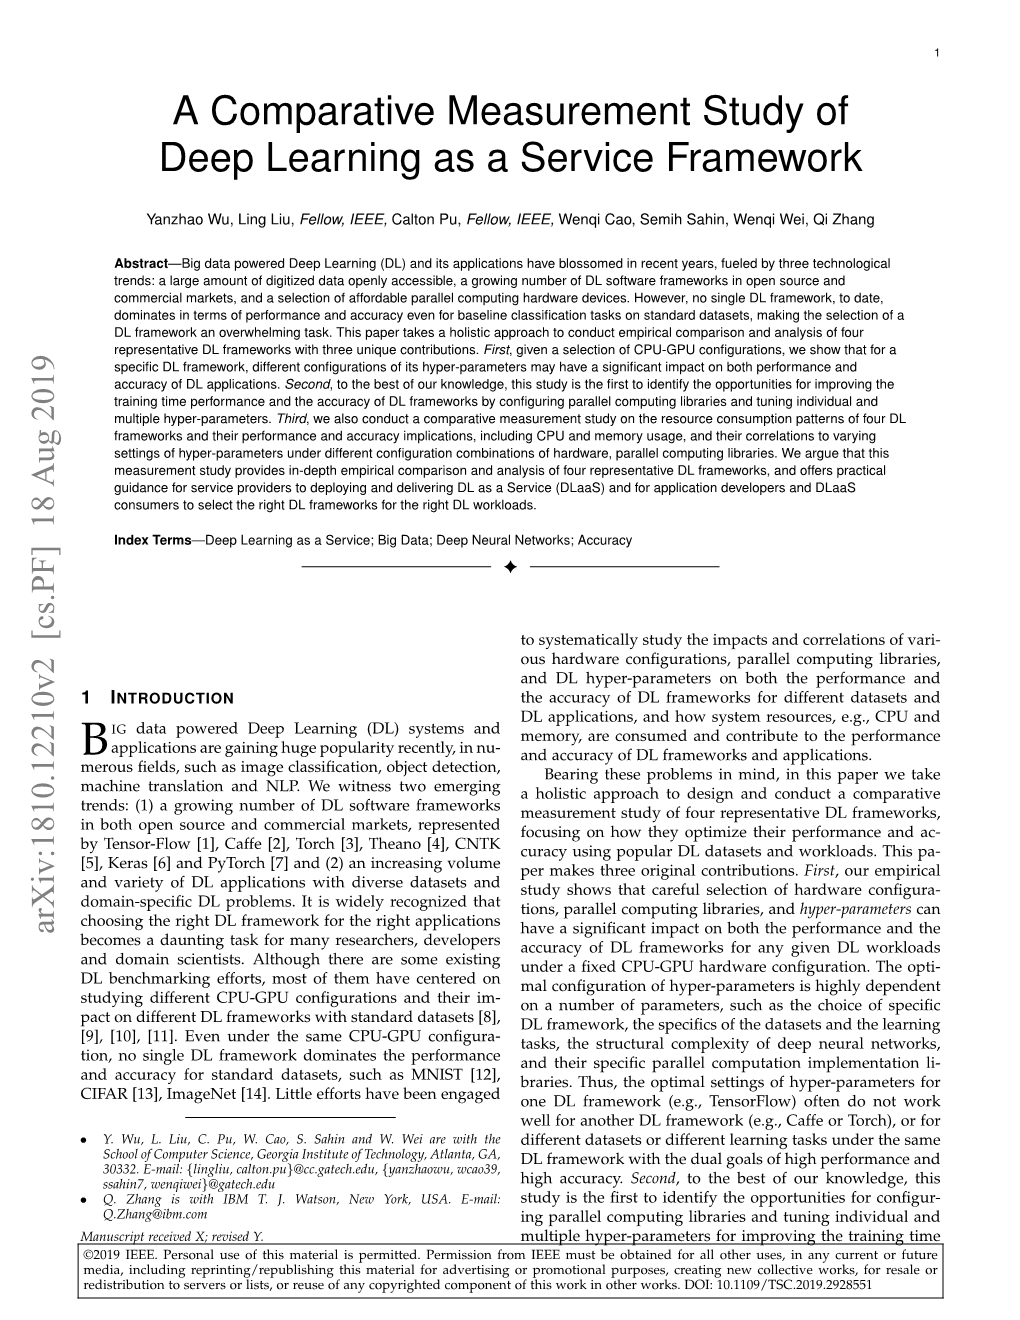 A Comparative Measurement Study of Deep Learning As a Service Framework